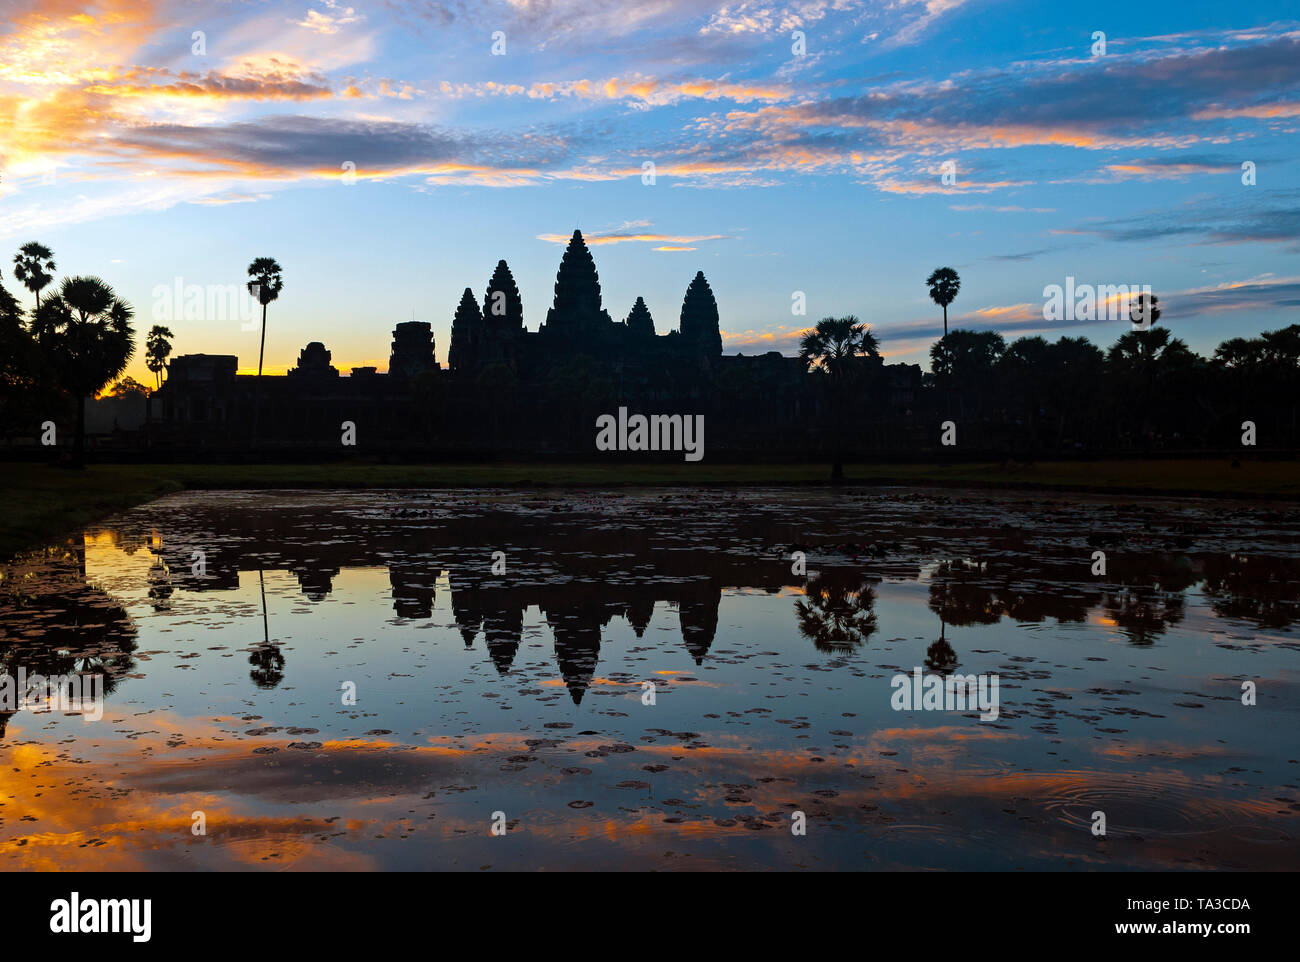 Colourful sunrise reflection in Angkor Wat with the silhouette of the temple towers with khmer architecture style, Siem Reap Province, Cambodia. Stock Photo